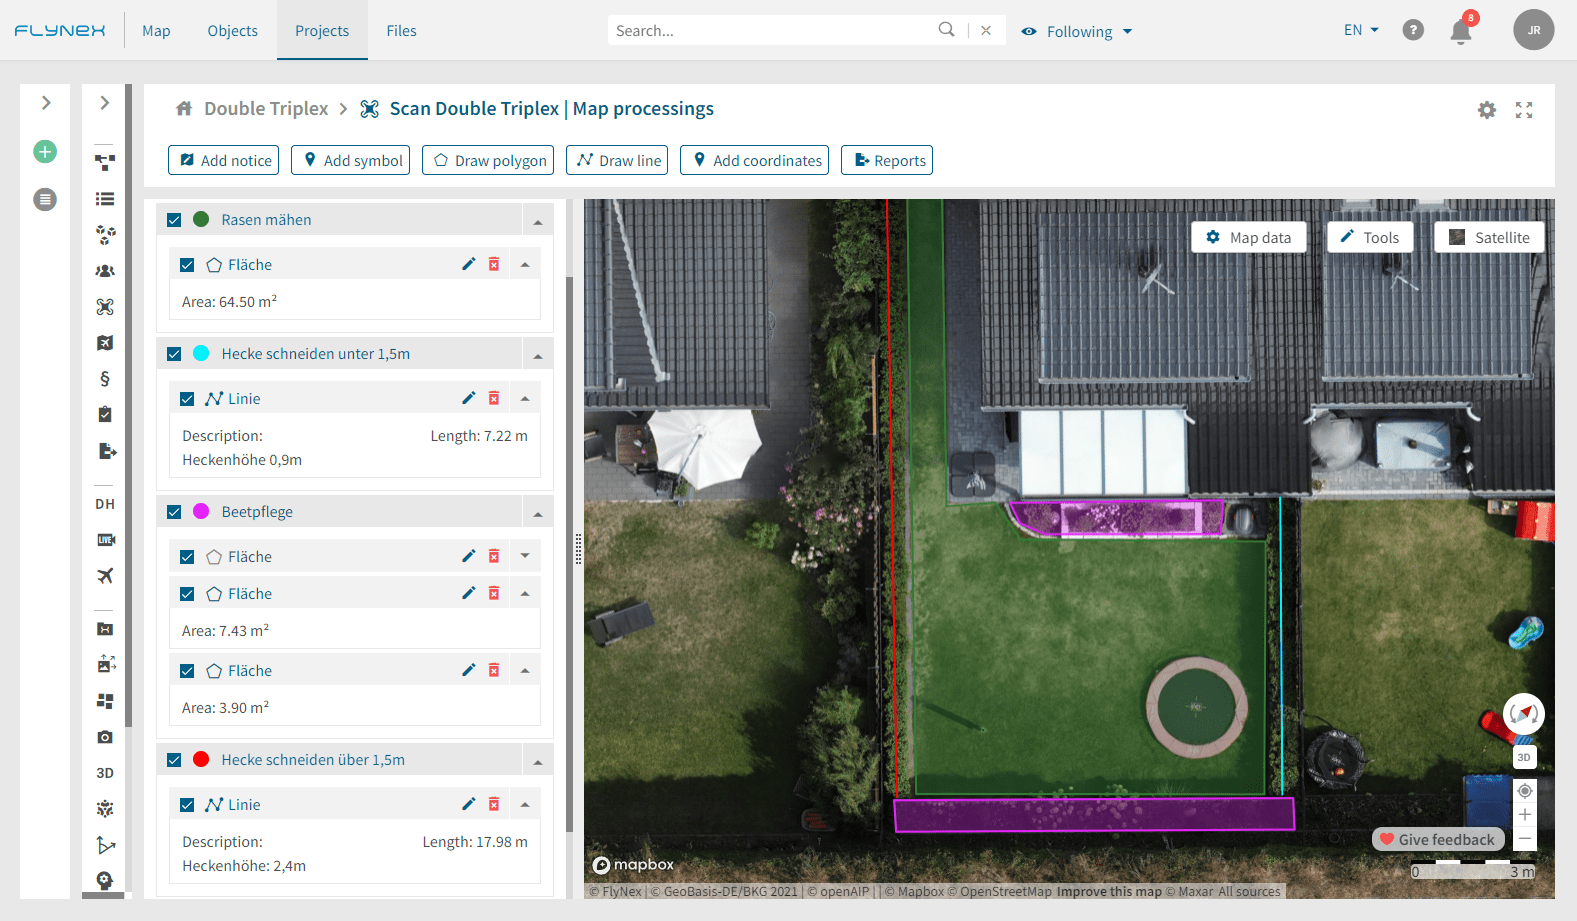 An example from the FlyNex platform - surveying of hedges, beds, and lawn areas.